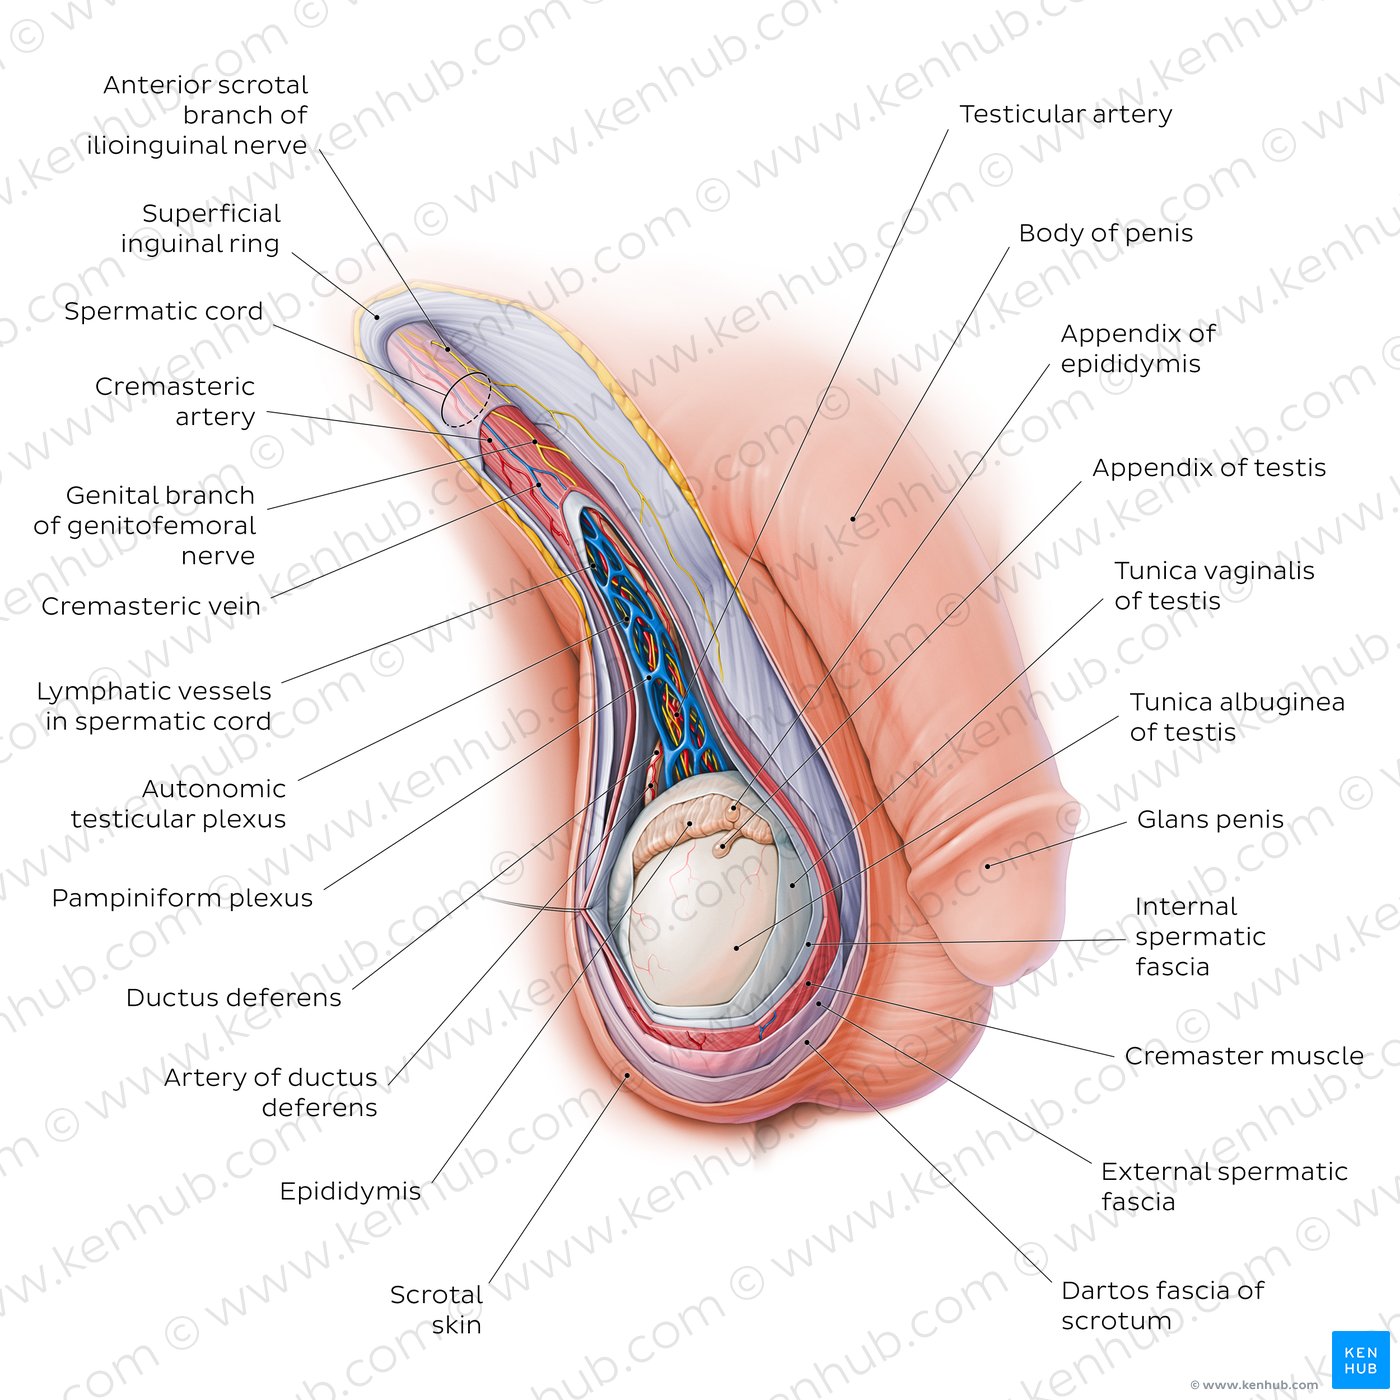 Scrotum and spermatic cord